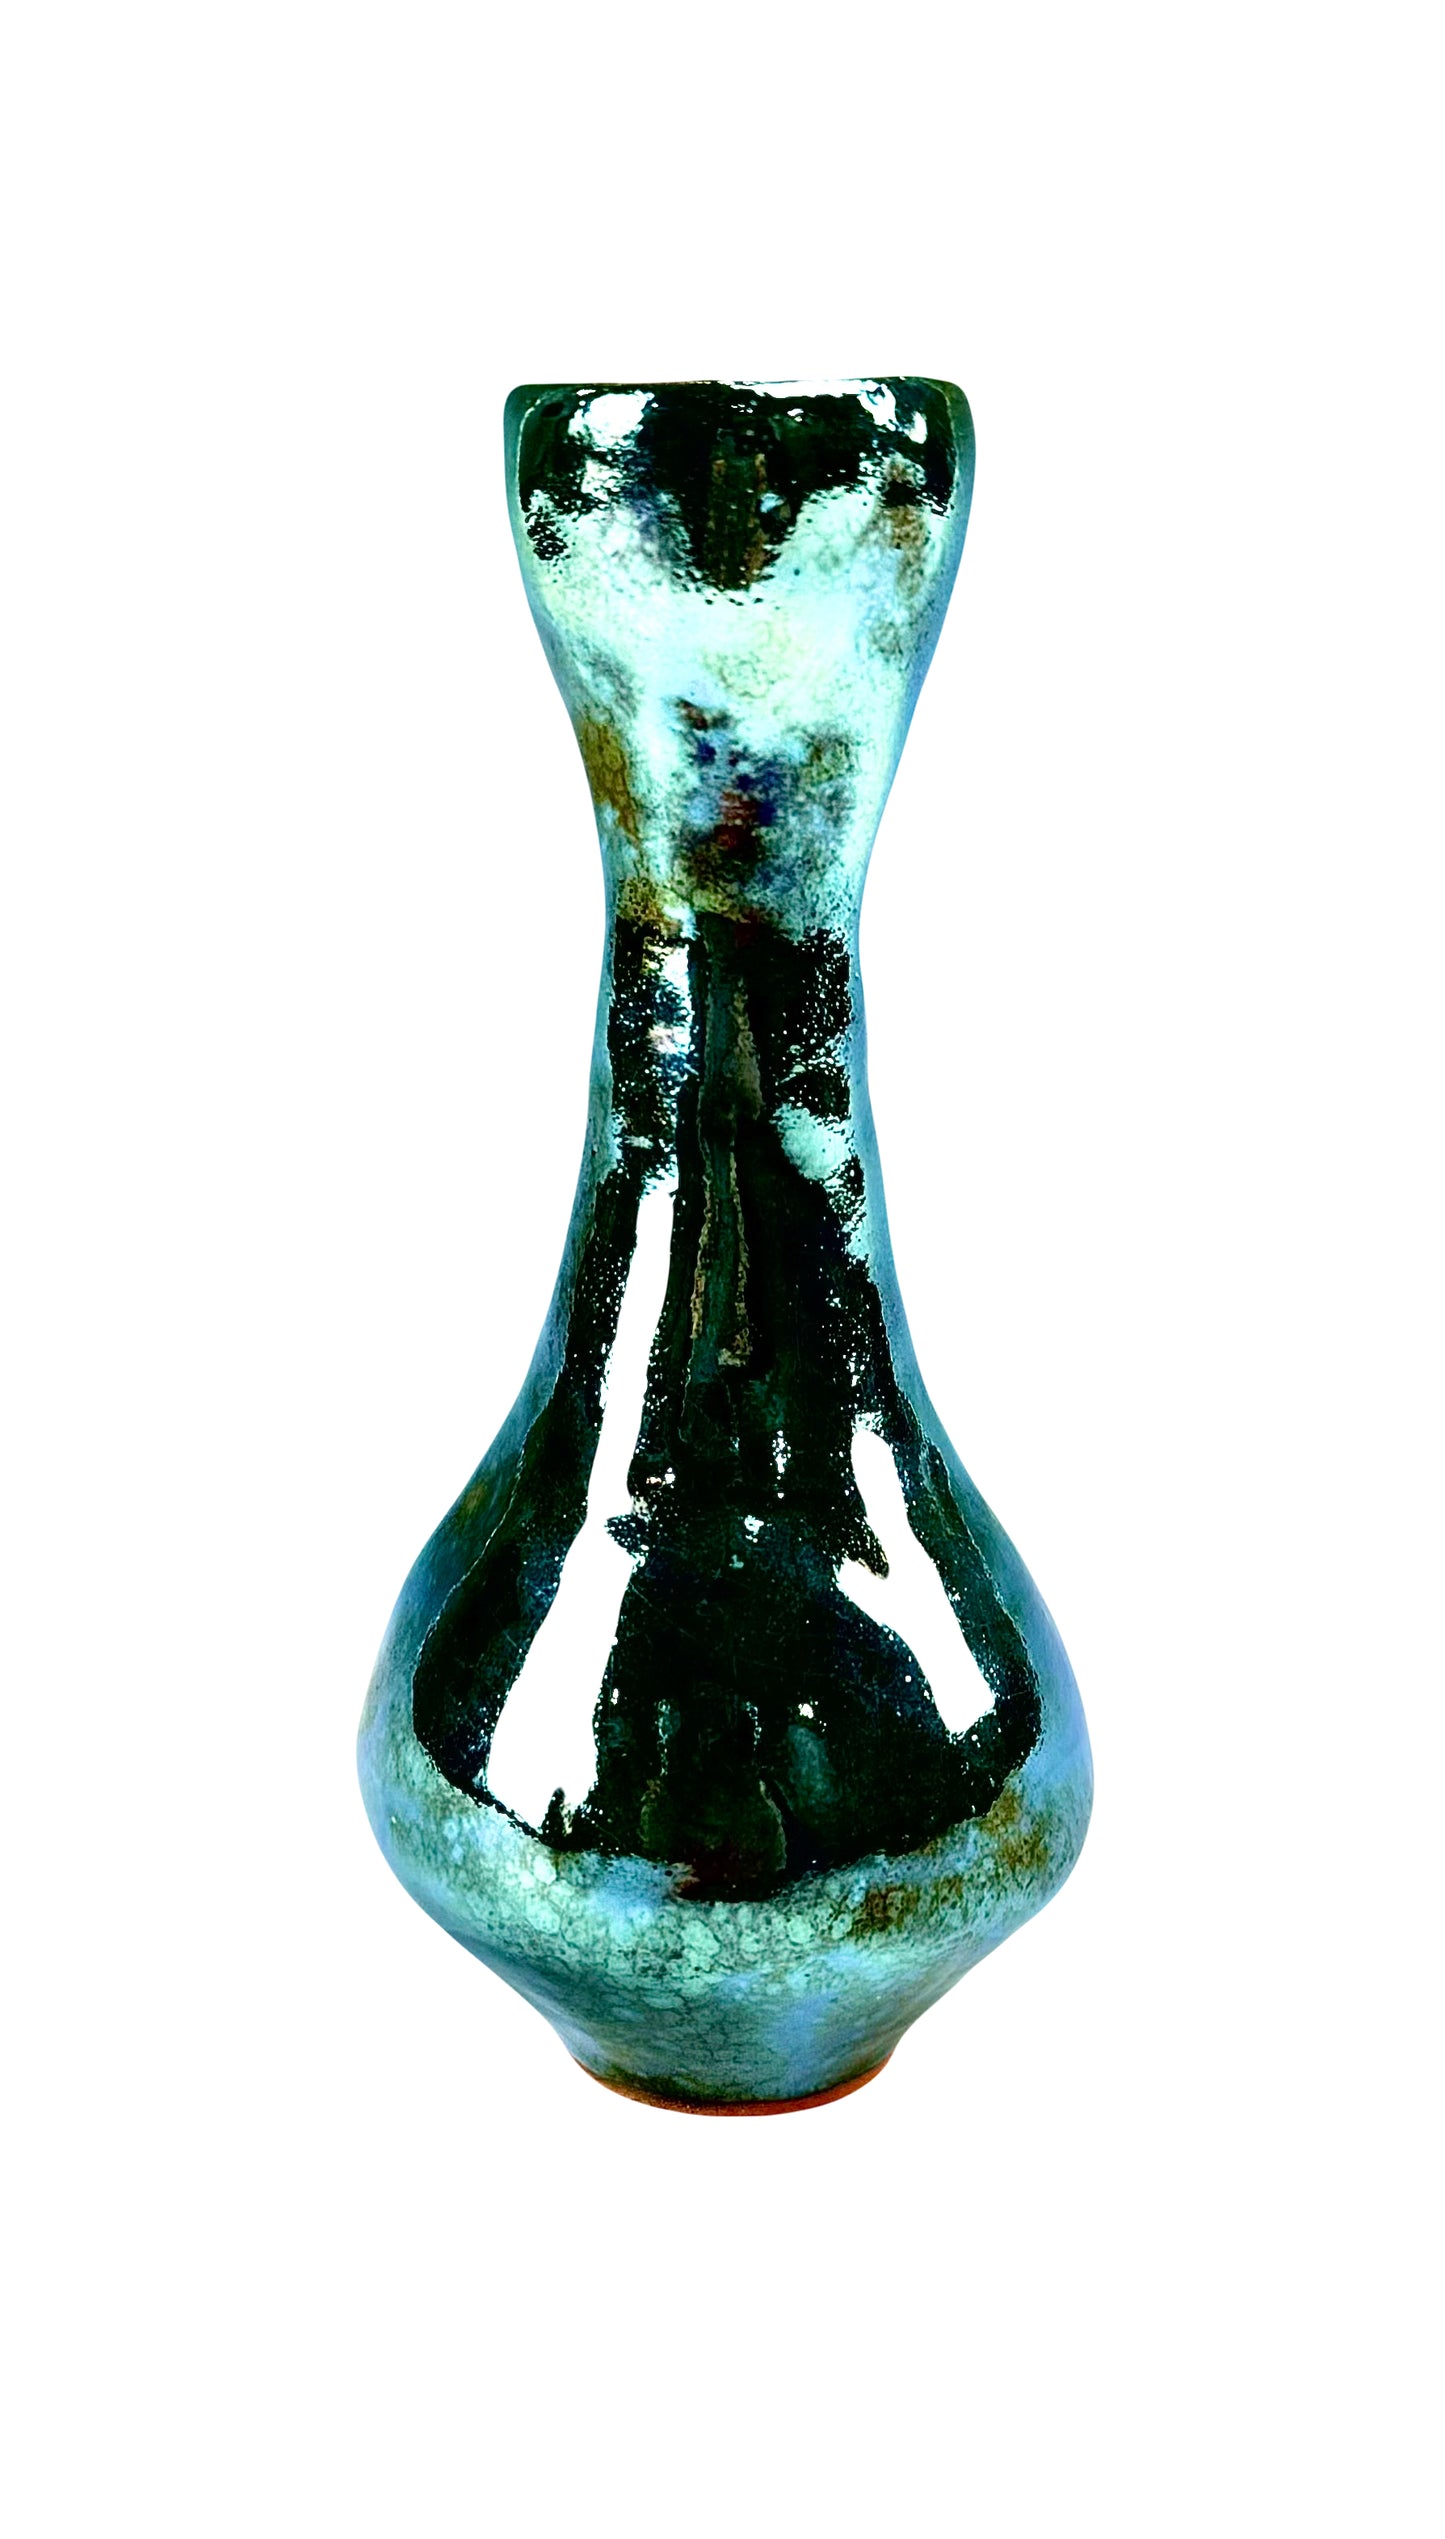 Teal and Silver Luster Vase